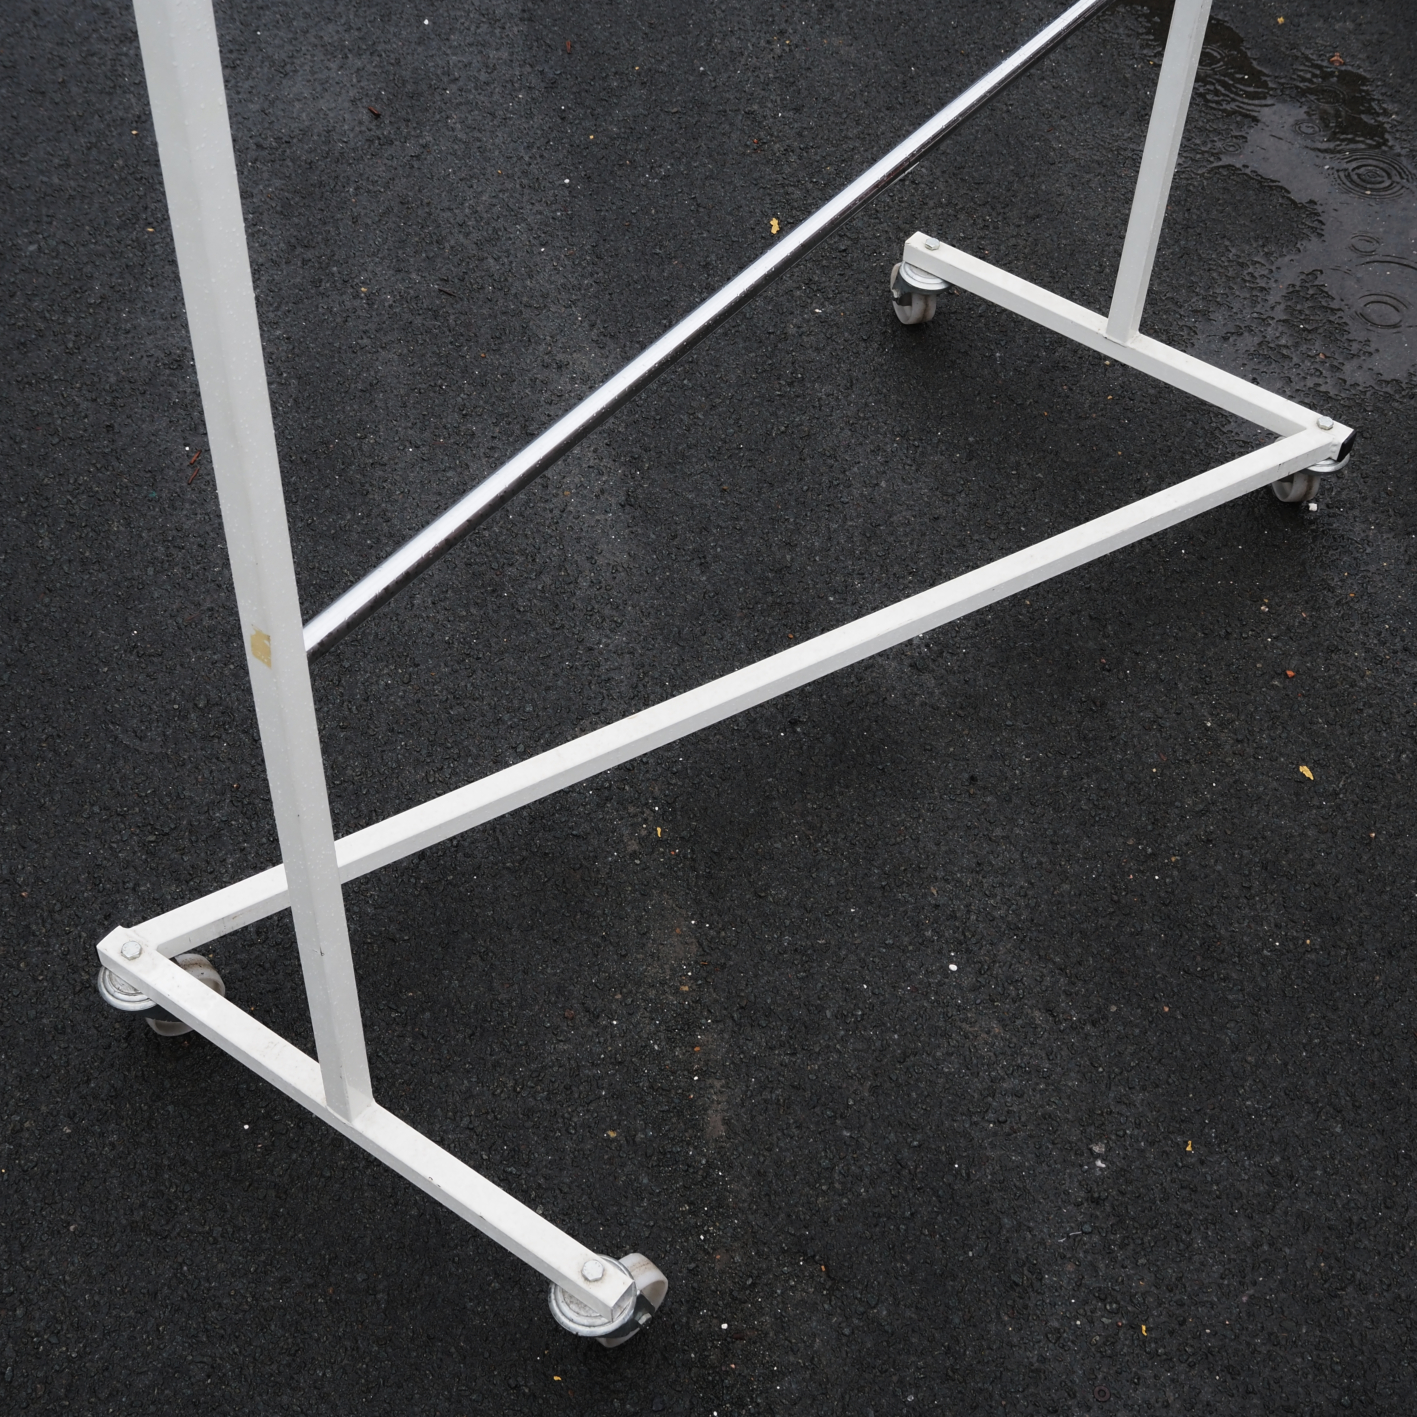 Clothes rack in steel with zigzag base (H. 191 cm) - Three racks